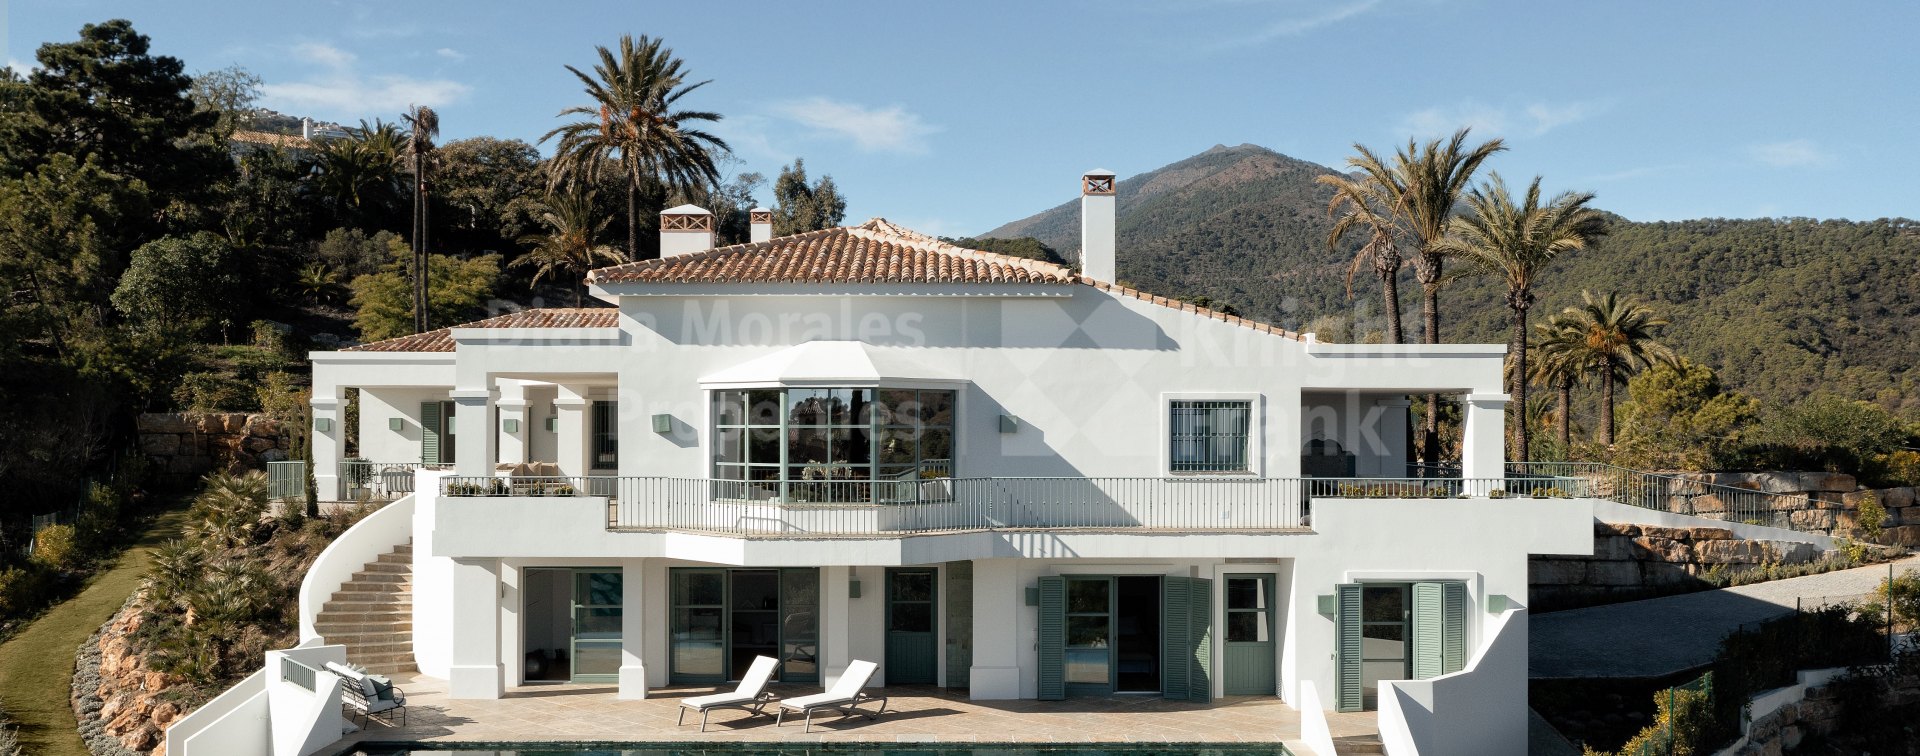 El Madroñal, Charming four-bedroom south-facing villa with lots of charm